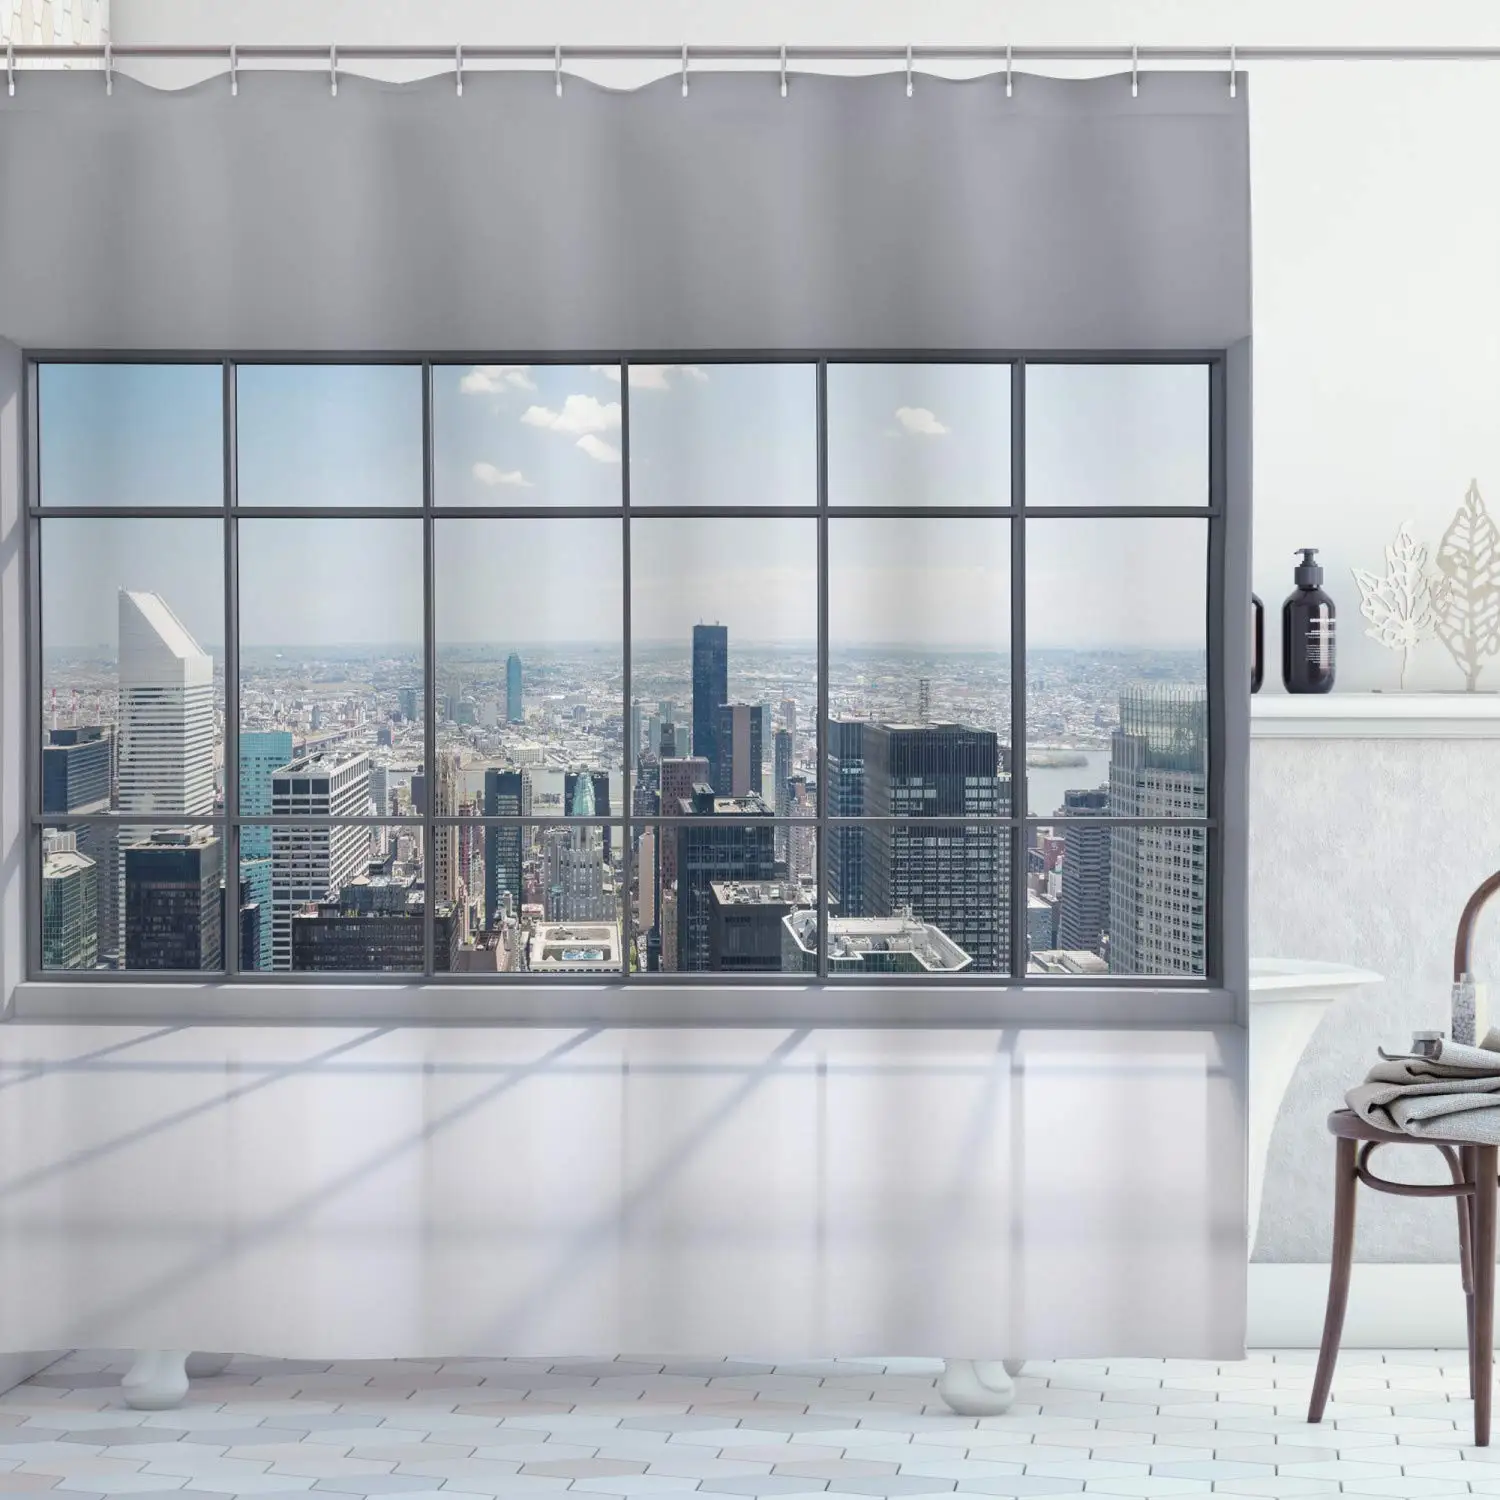 

City Shower Curtain,Office with Window Downtown Skyscraper Buildings Domestic Cityscape Art,Cloth Fabric Bathroom Curtain Screen